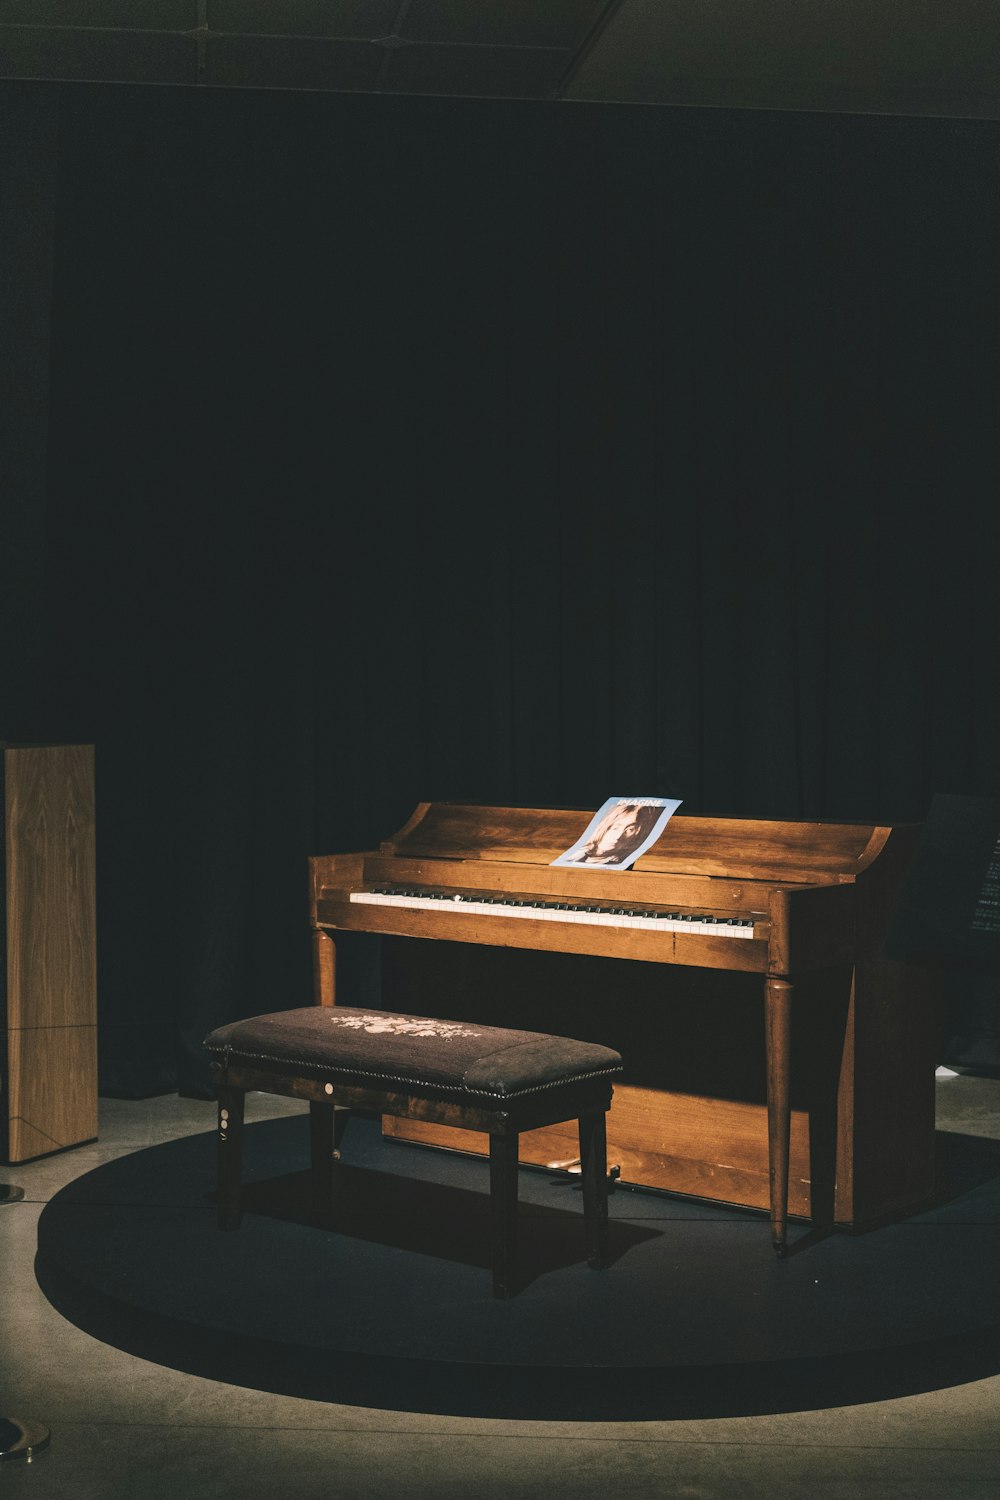 brown wooden upright piano with ottoman bench and light turned-on